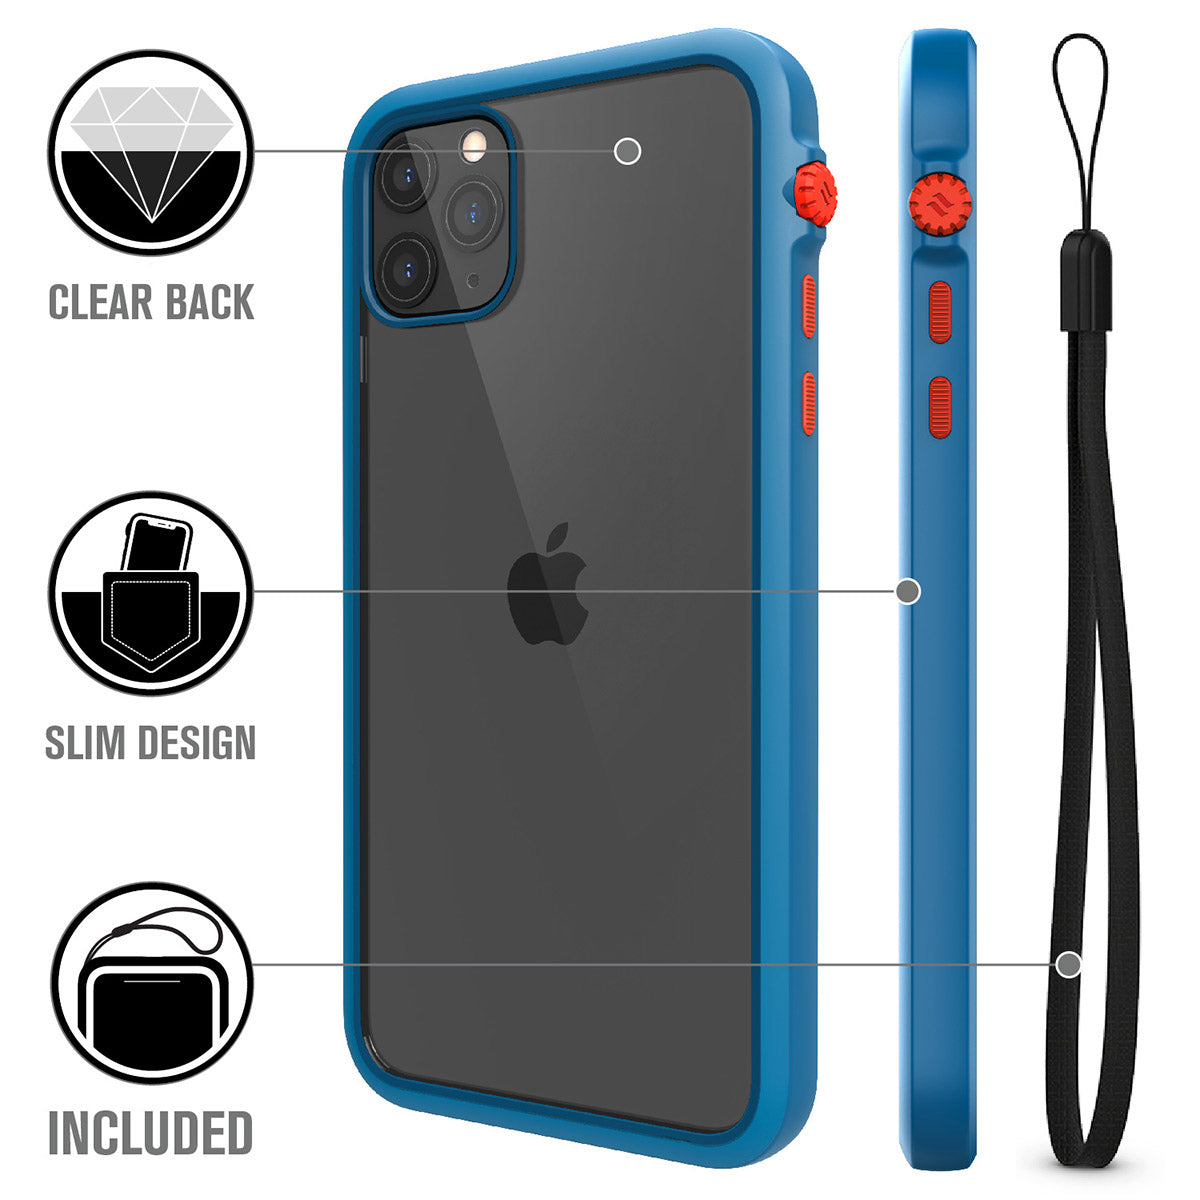 catalyst iPhone 11 series impact protection case bluerdige sunset showing the back view and buttons of the case for iPhone 11 pro max and a lanyard text reads clear back slim design included